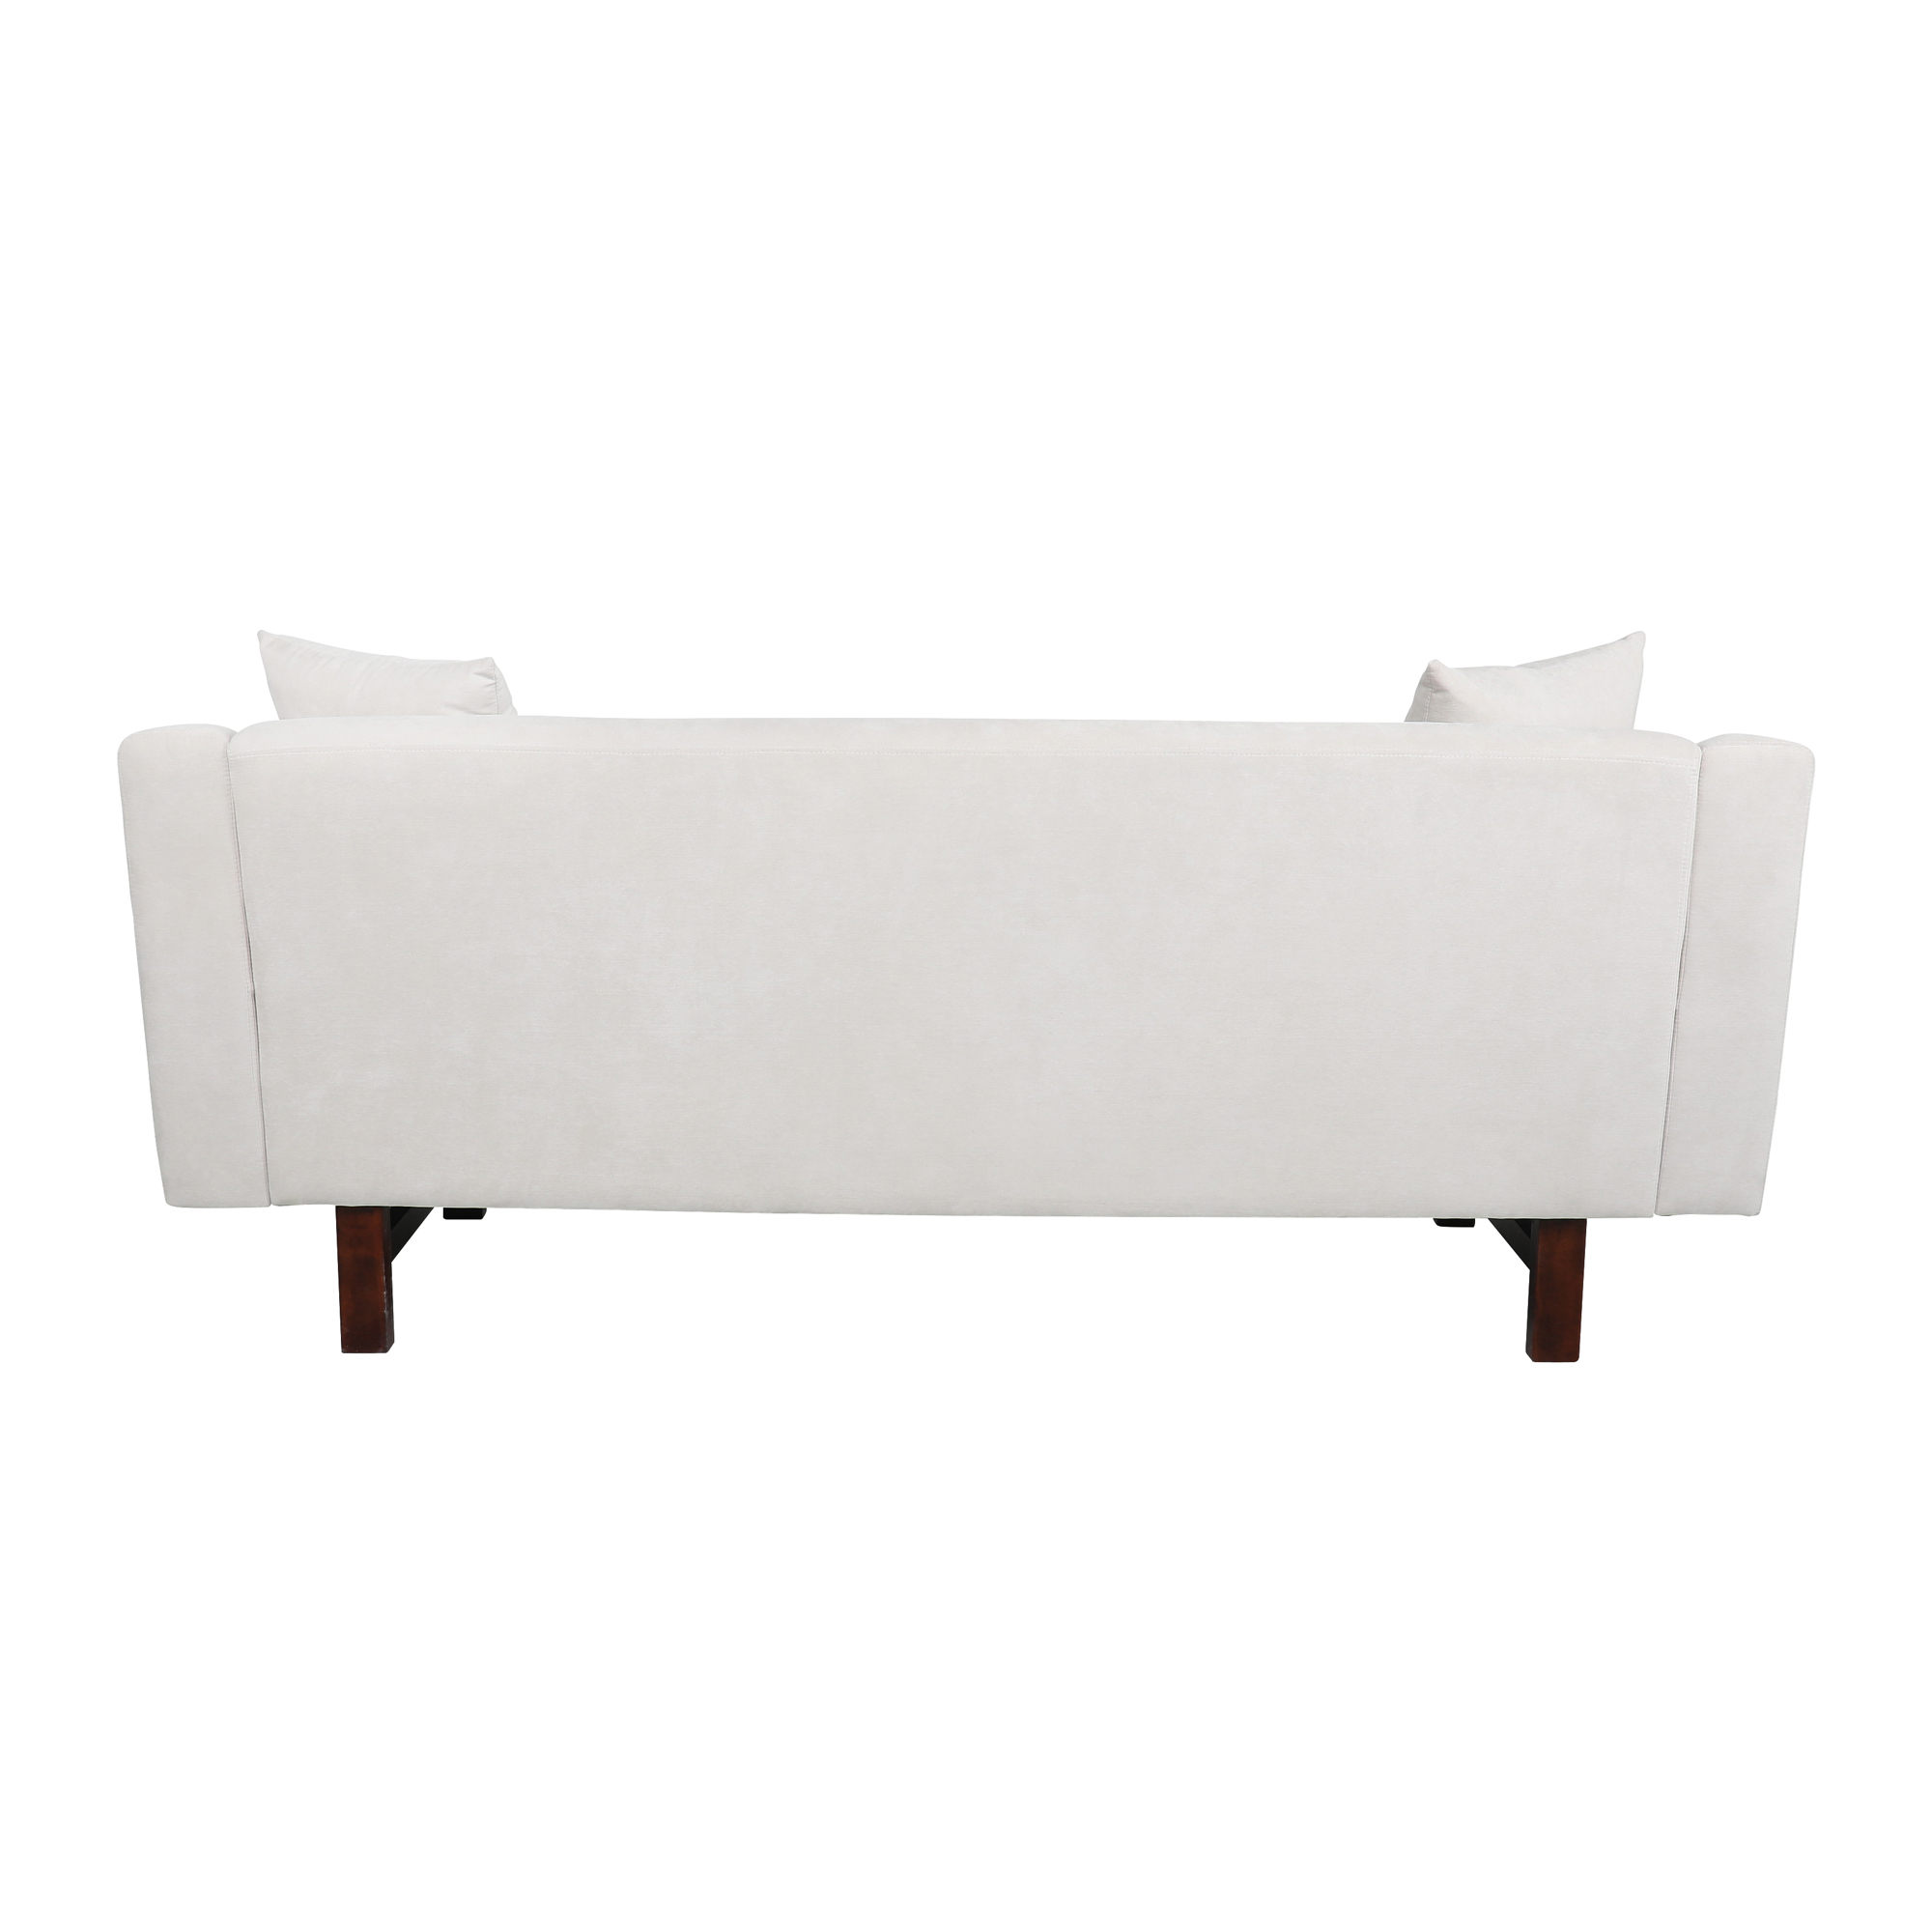 Contemporary 3 Seater Fabric Sofa with Accent Pillows